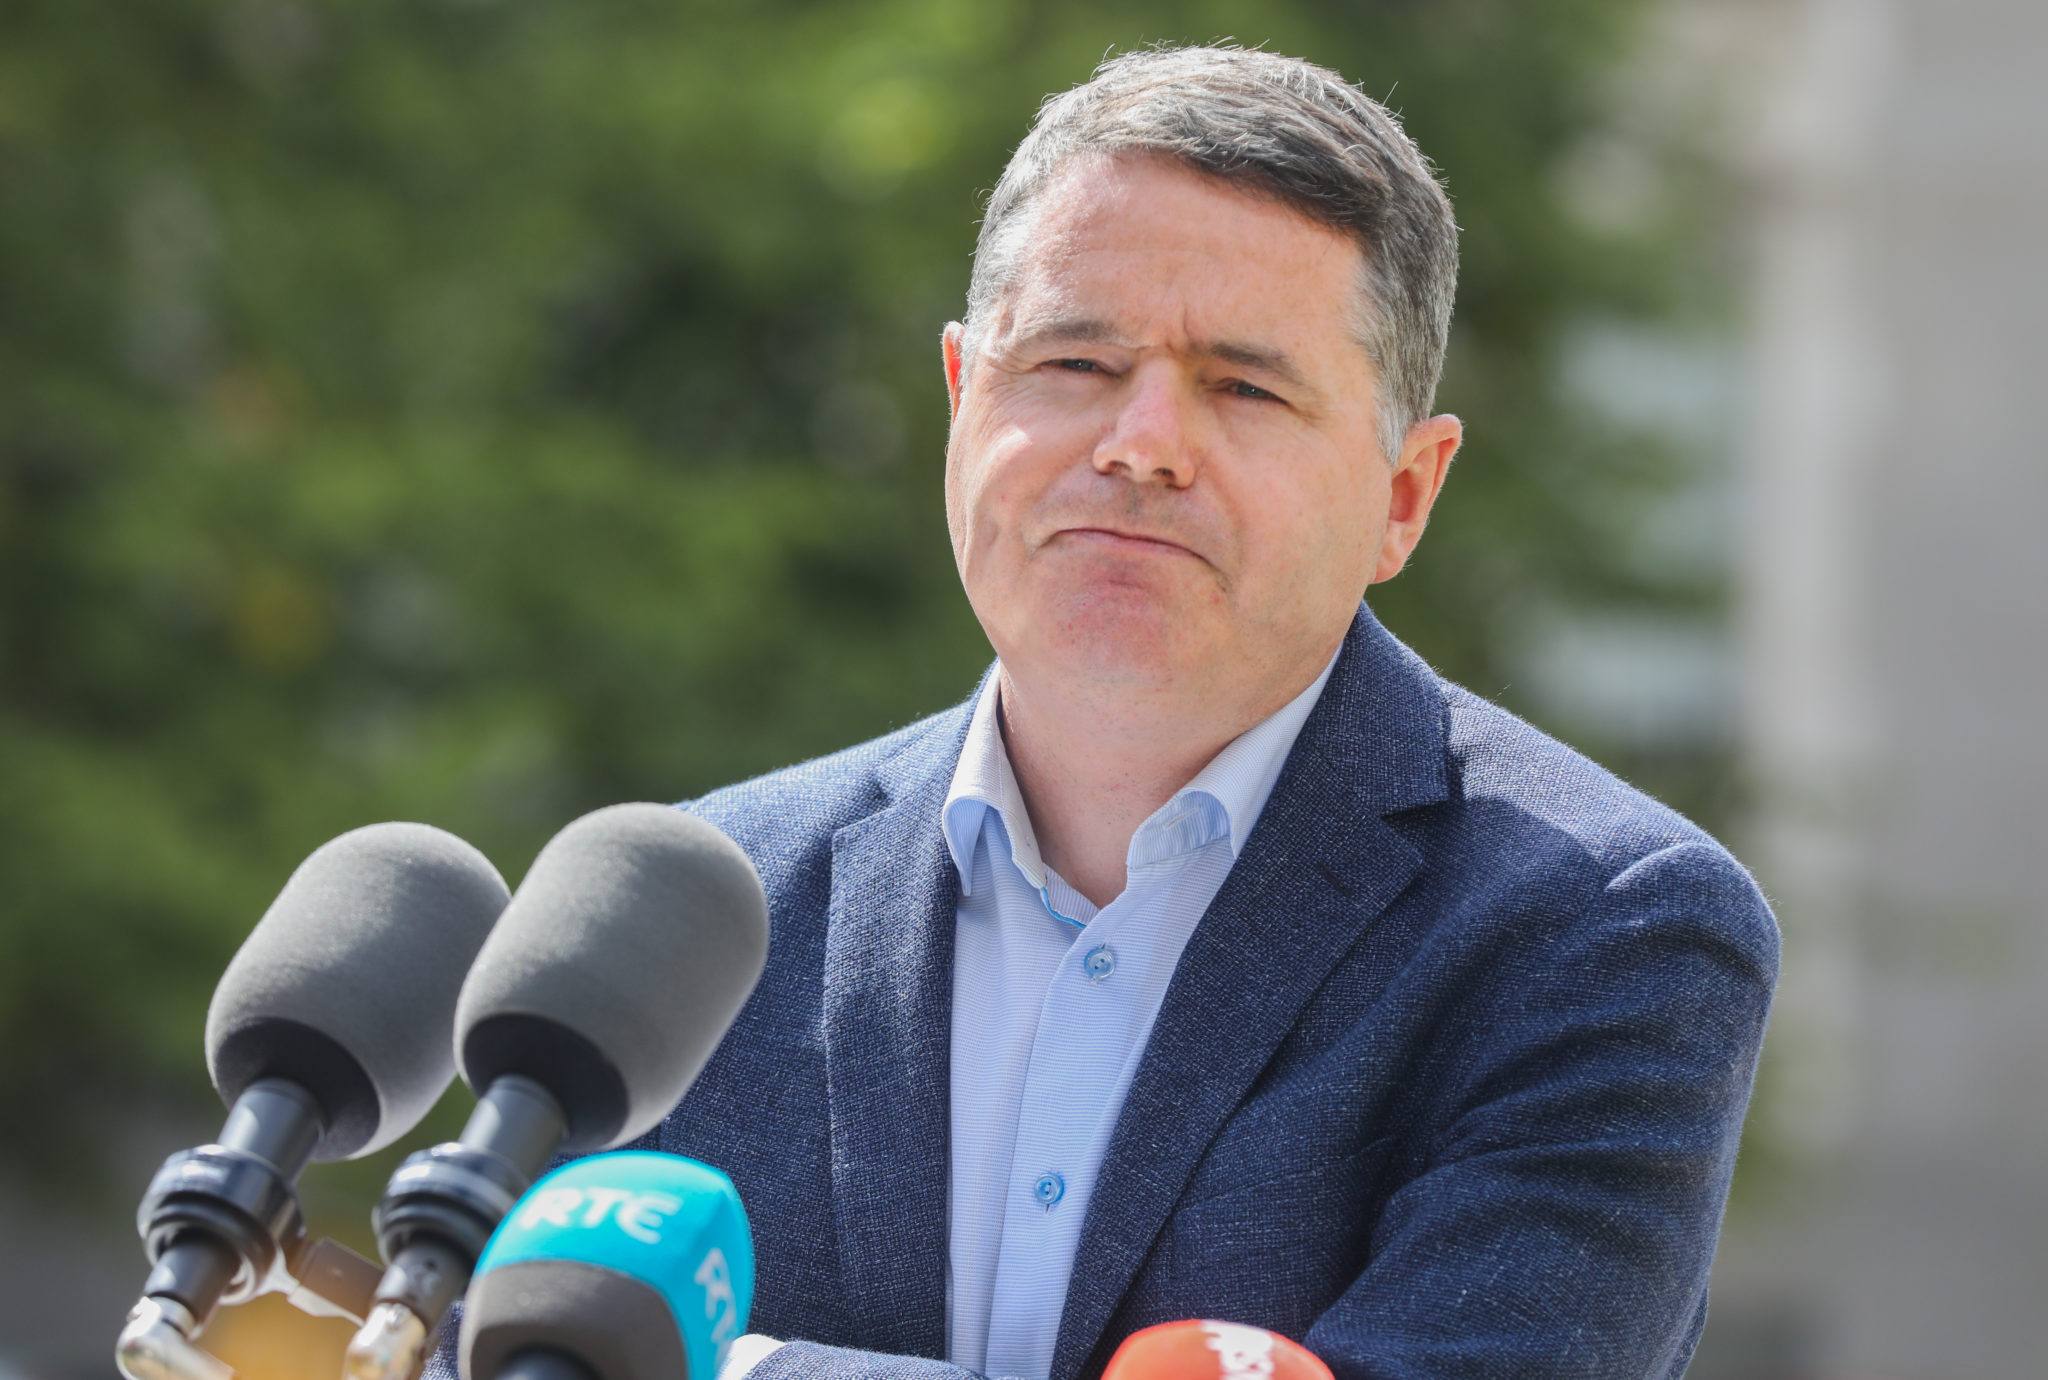 The Minister for Finance Paschal Donohoe outside Government Buildings, 10-08-2021. Image: Leah Farrell/RollingNews